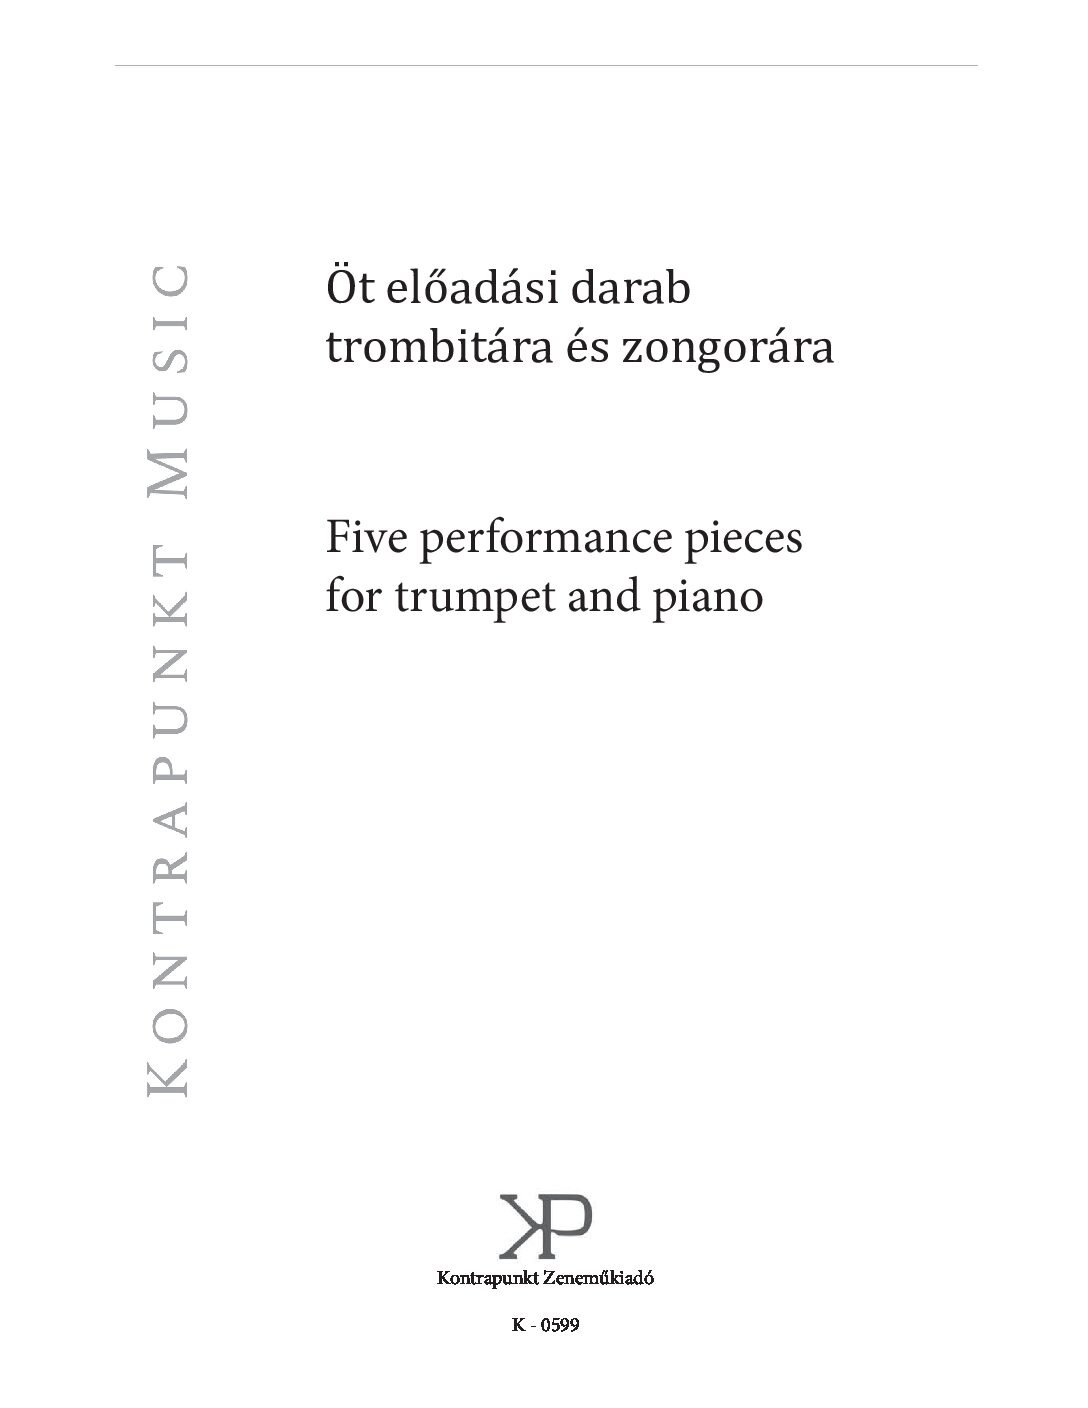 Five performance pieces for trumpet and piano